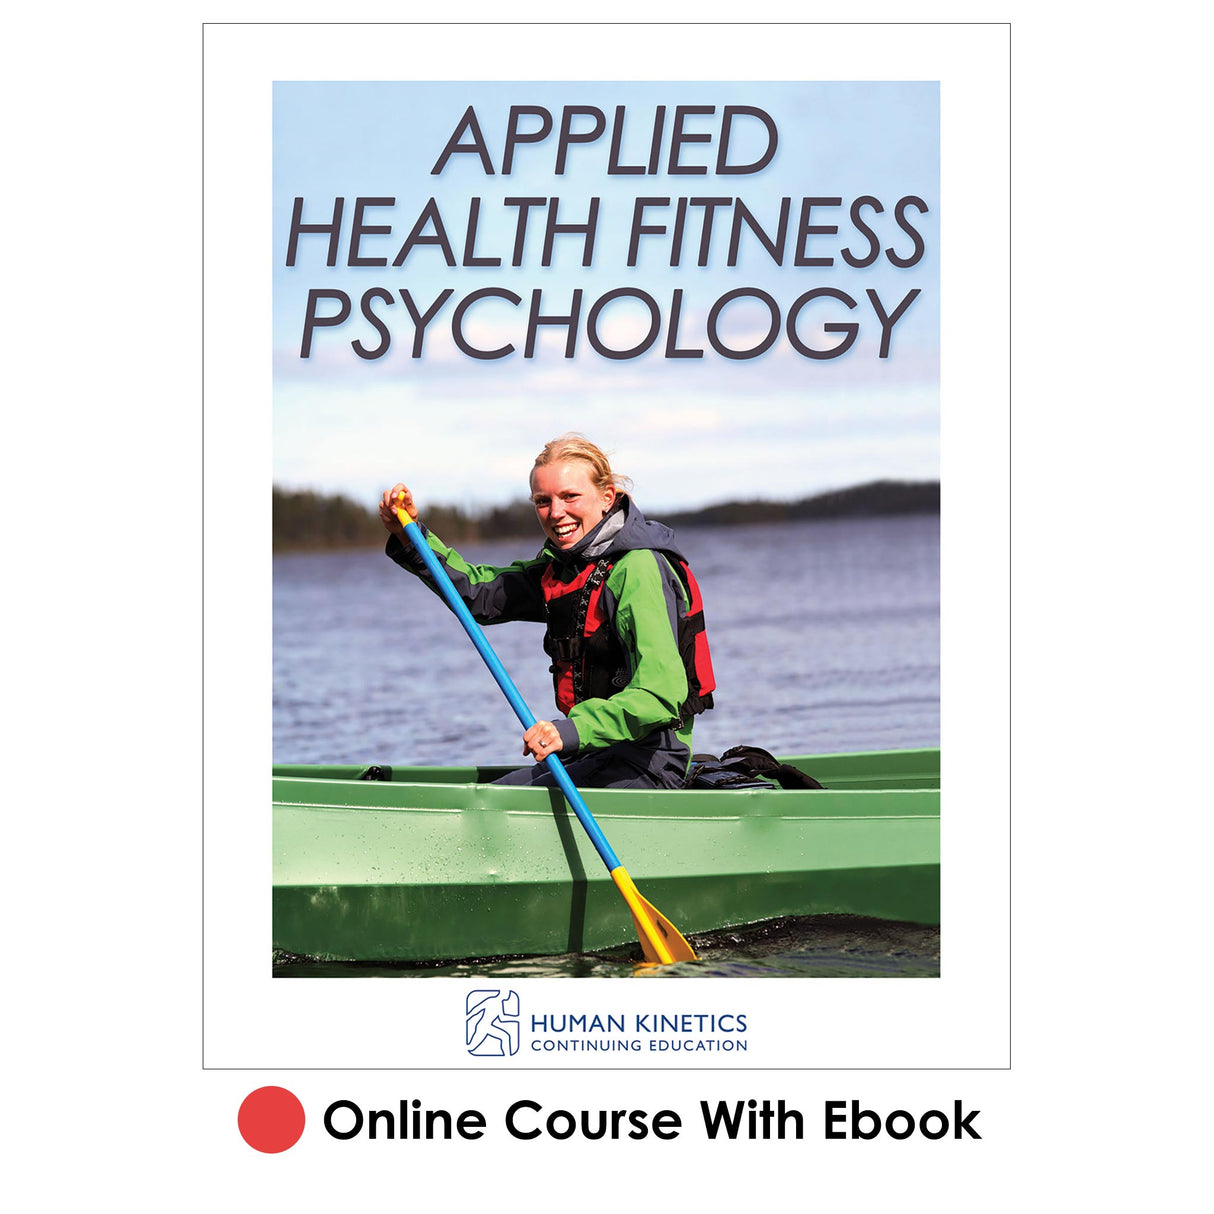 Applied Health Fitness Psychology Online CE Course With Ebook